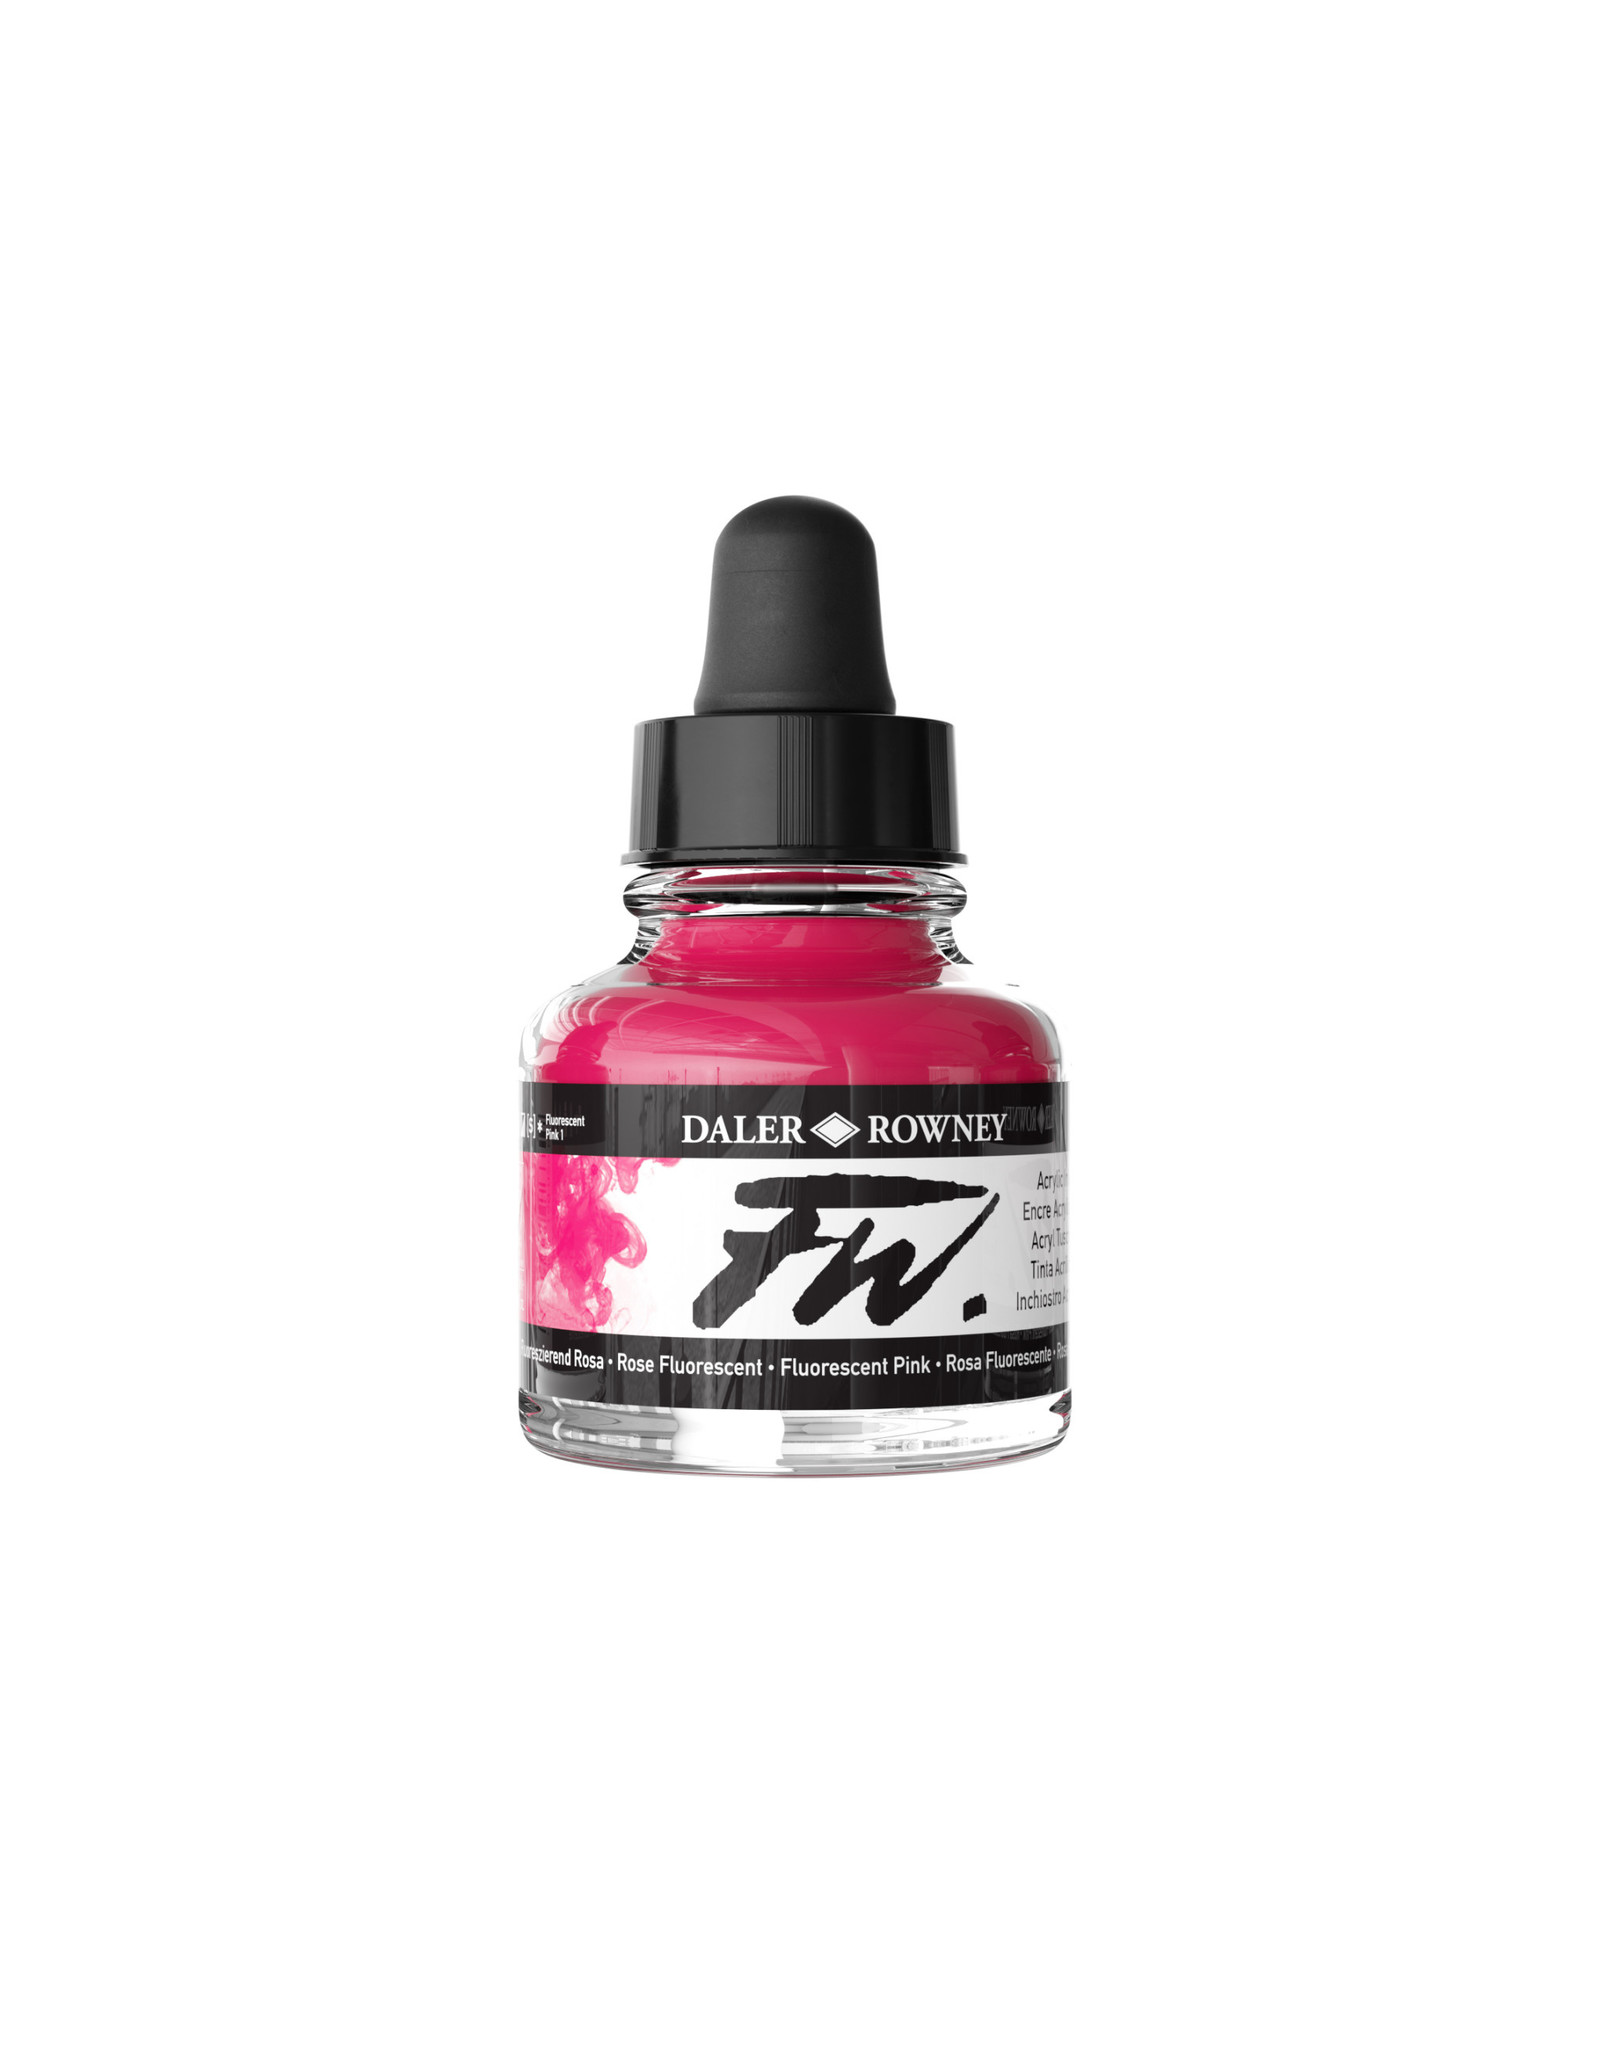 Daler-Rowney Daler-Rowney FW Acrylic Artists Ink, Fluorescent Pink 29.5ml